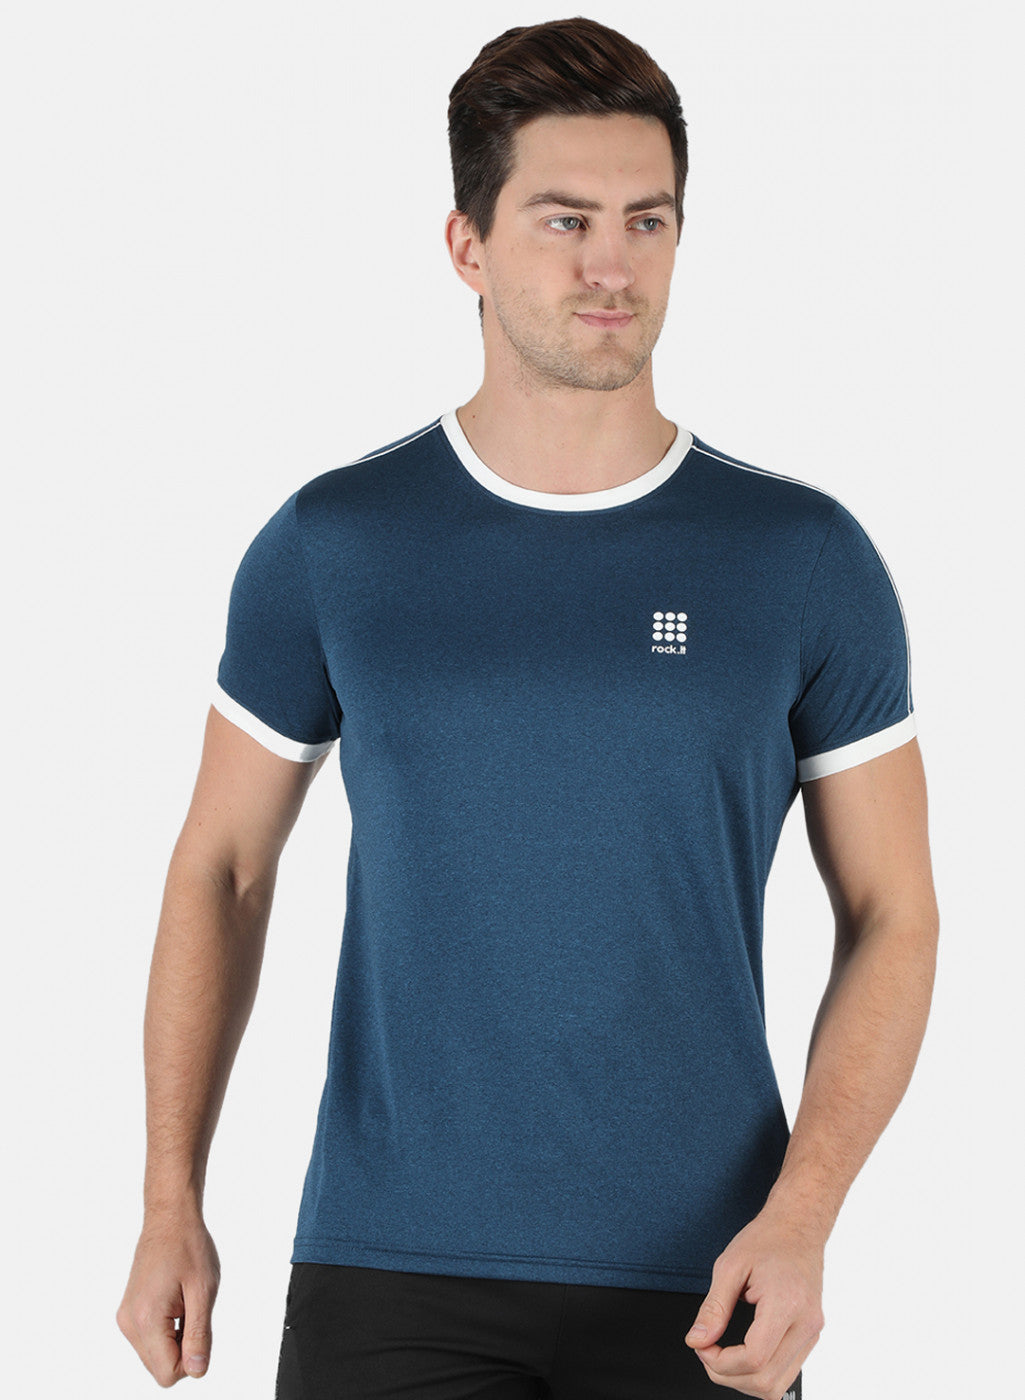 Buy Blue Shirts for Men by ENGLISH NAVY Online